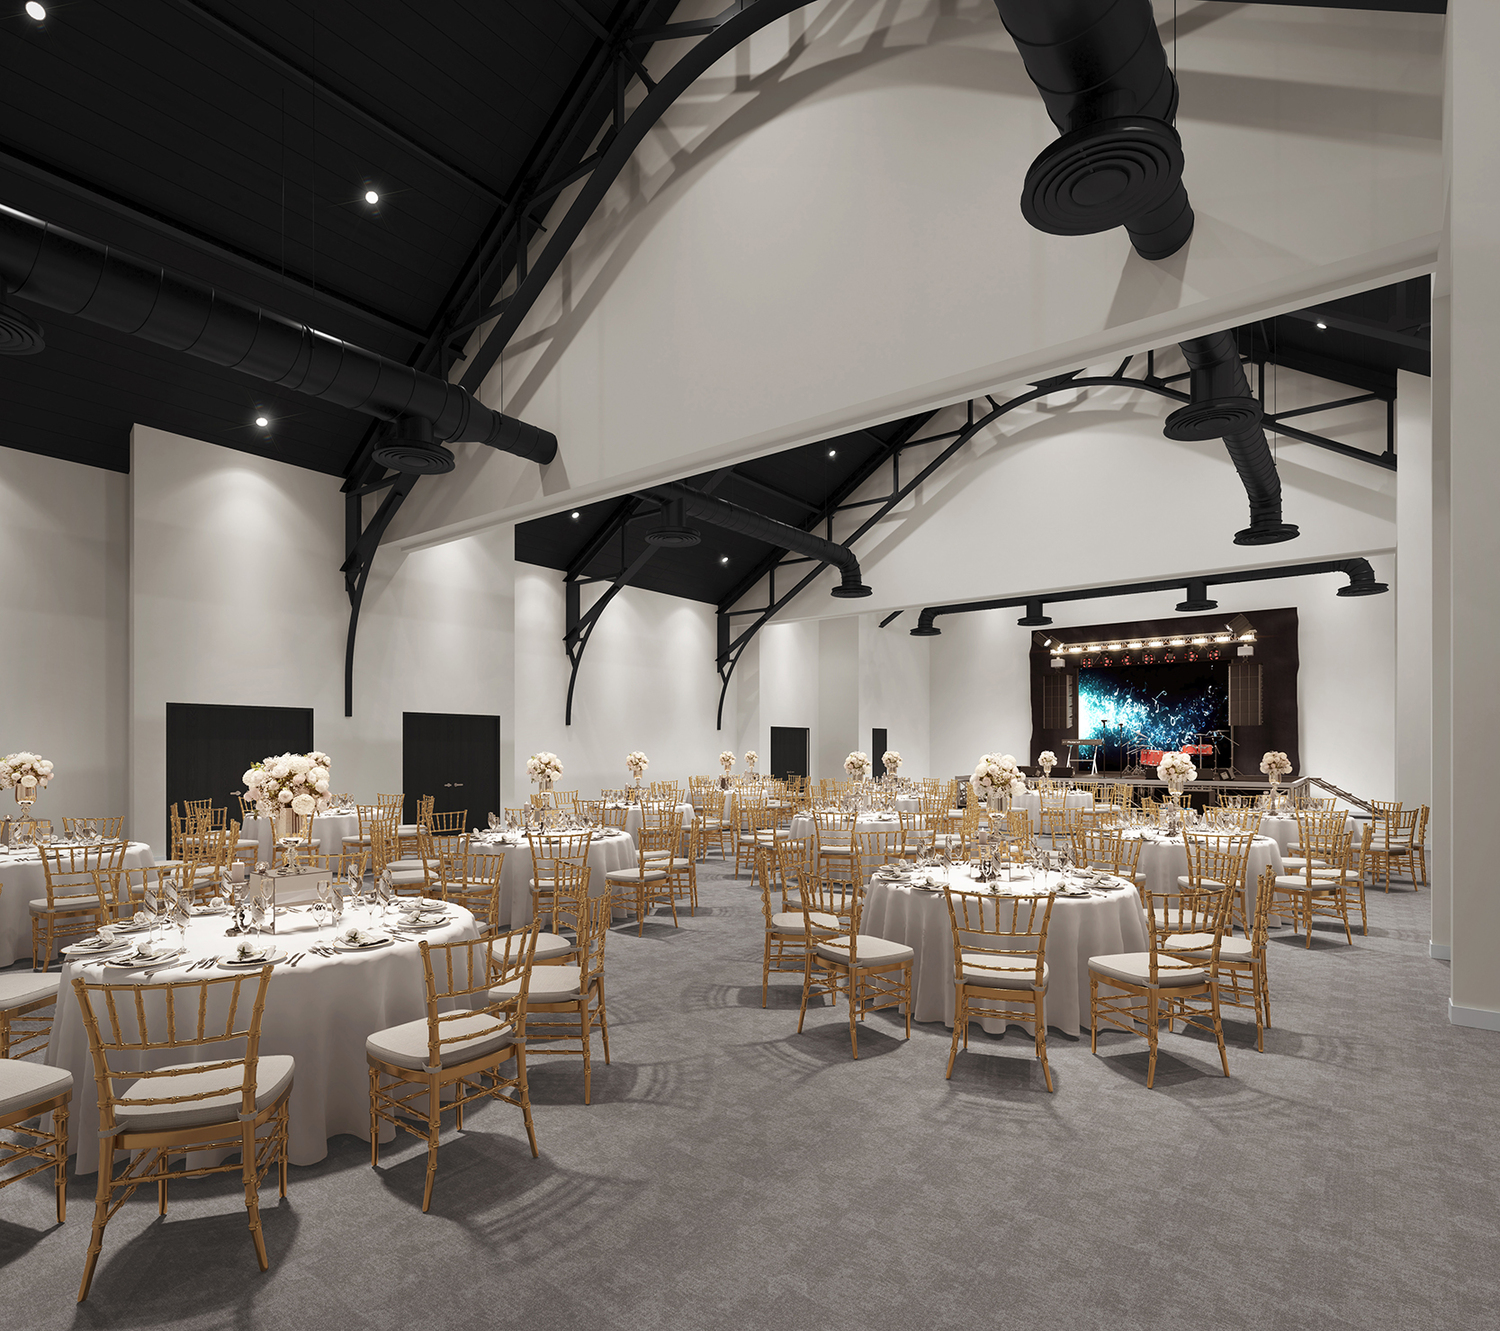 A rendering of one of the community event spaces planned for the second floor at the Montauk Playhouse, which consultants have recommended be tackled in conjunction with the construction of the swimming facilities on the first floor. Montaukplayhouse.org